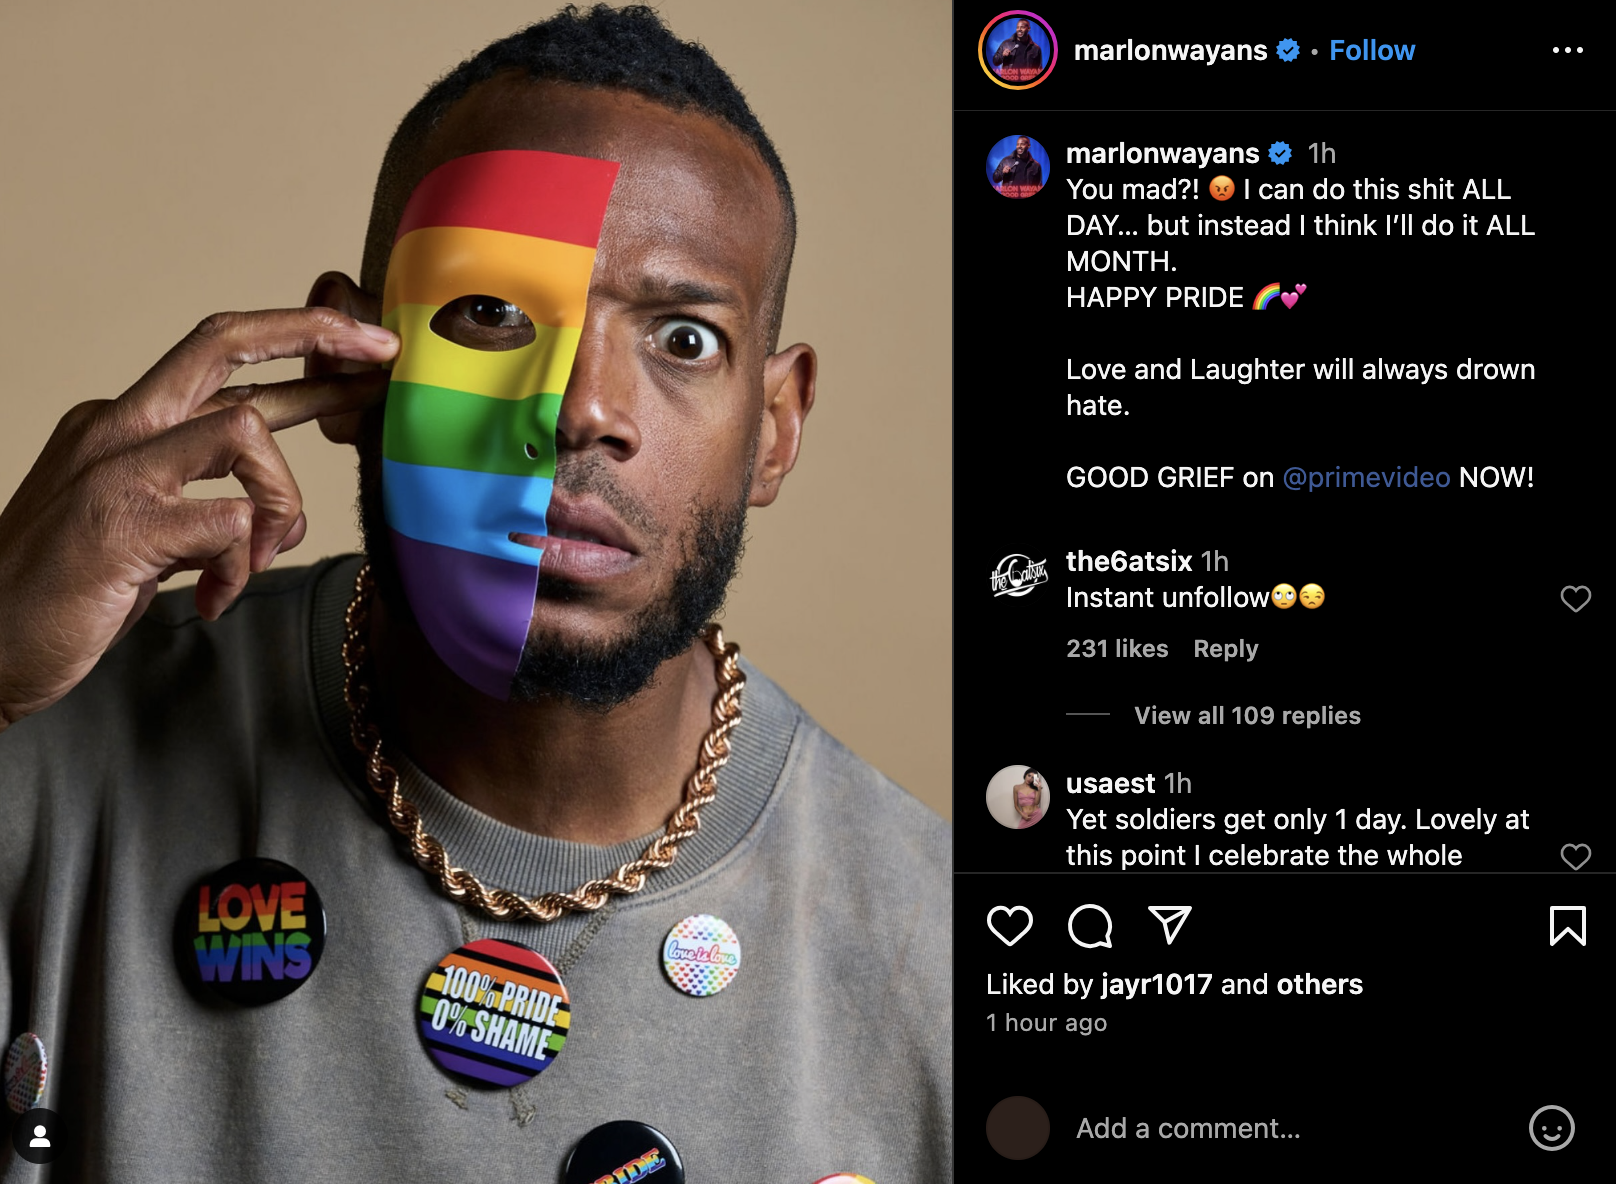 Marlon Wayans holds a rainbow-colored half-mask over his face. He wears a necklace and buttons that display messages supporting LGBTQ+ pride